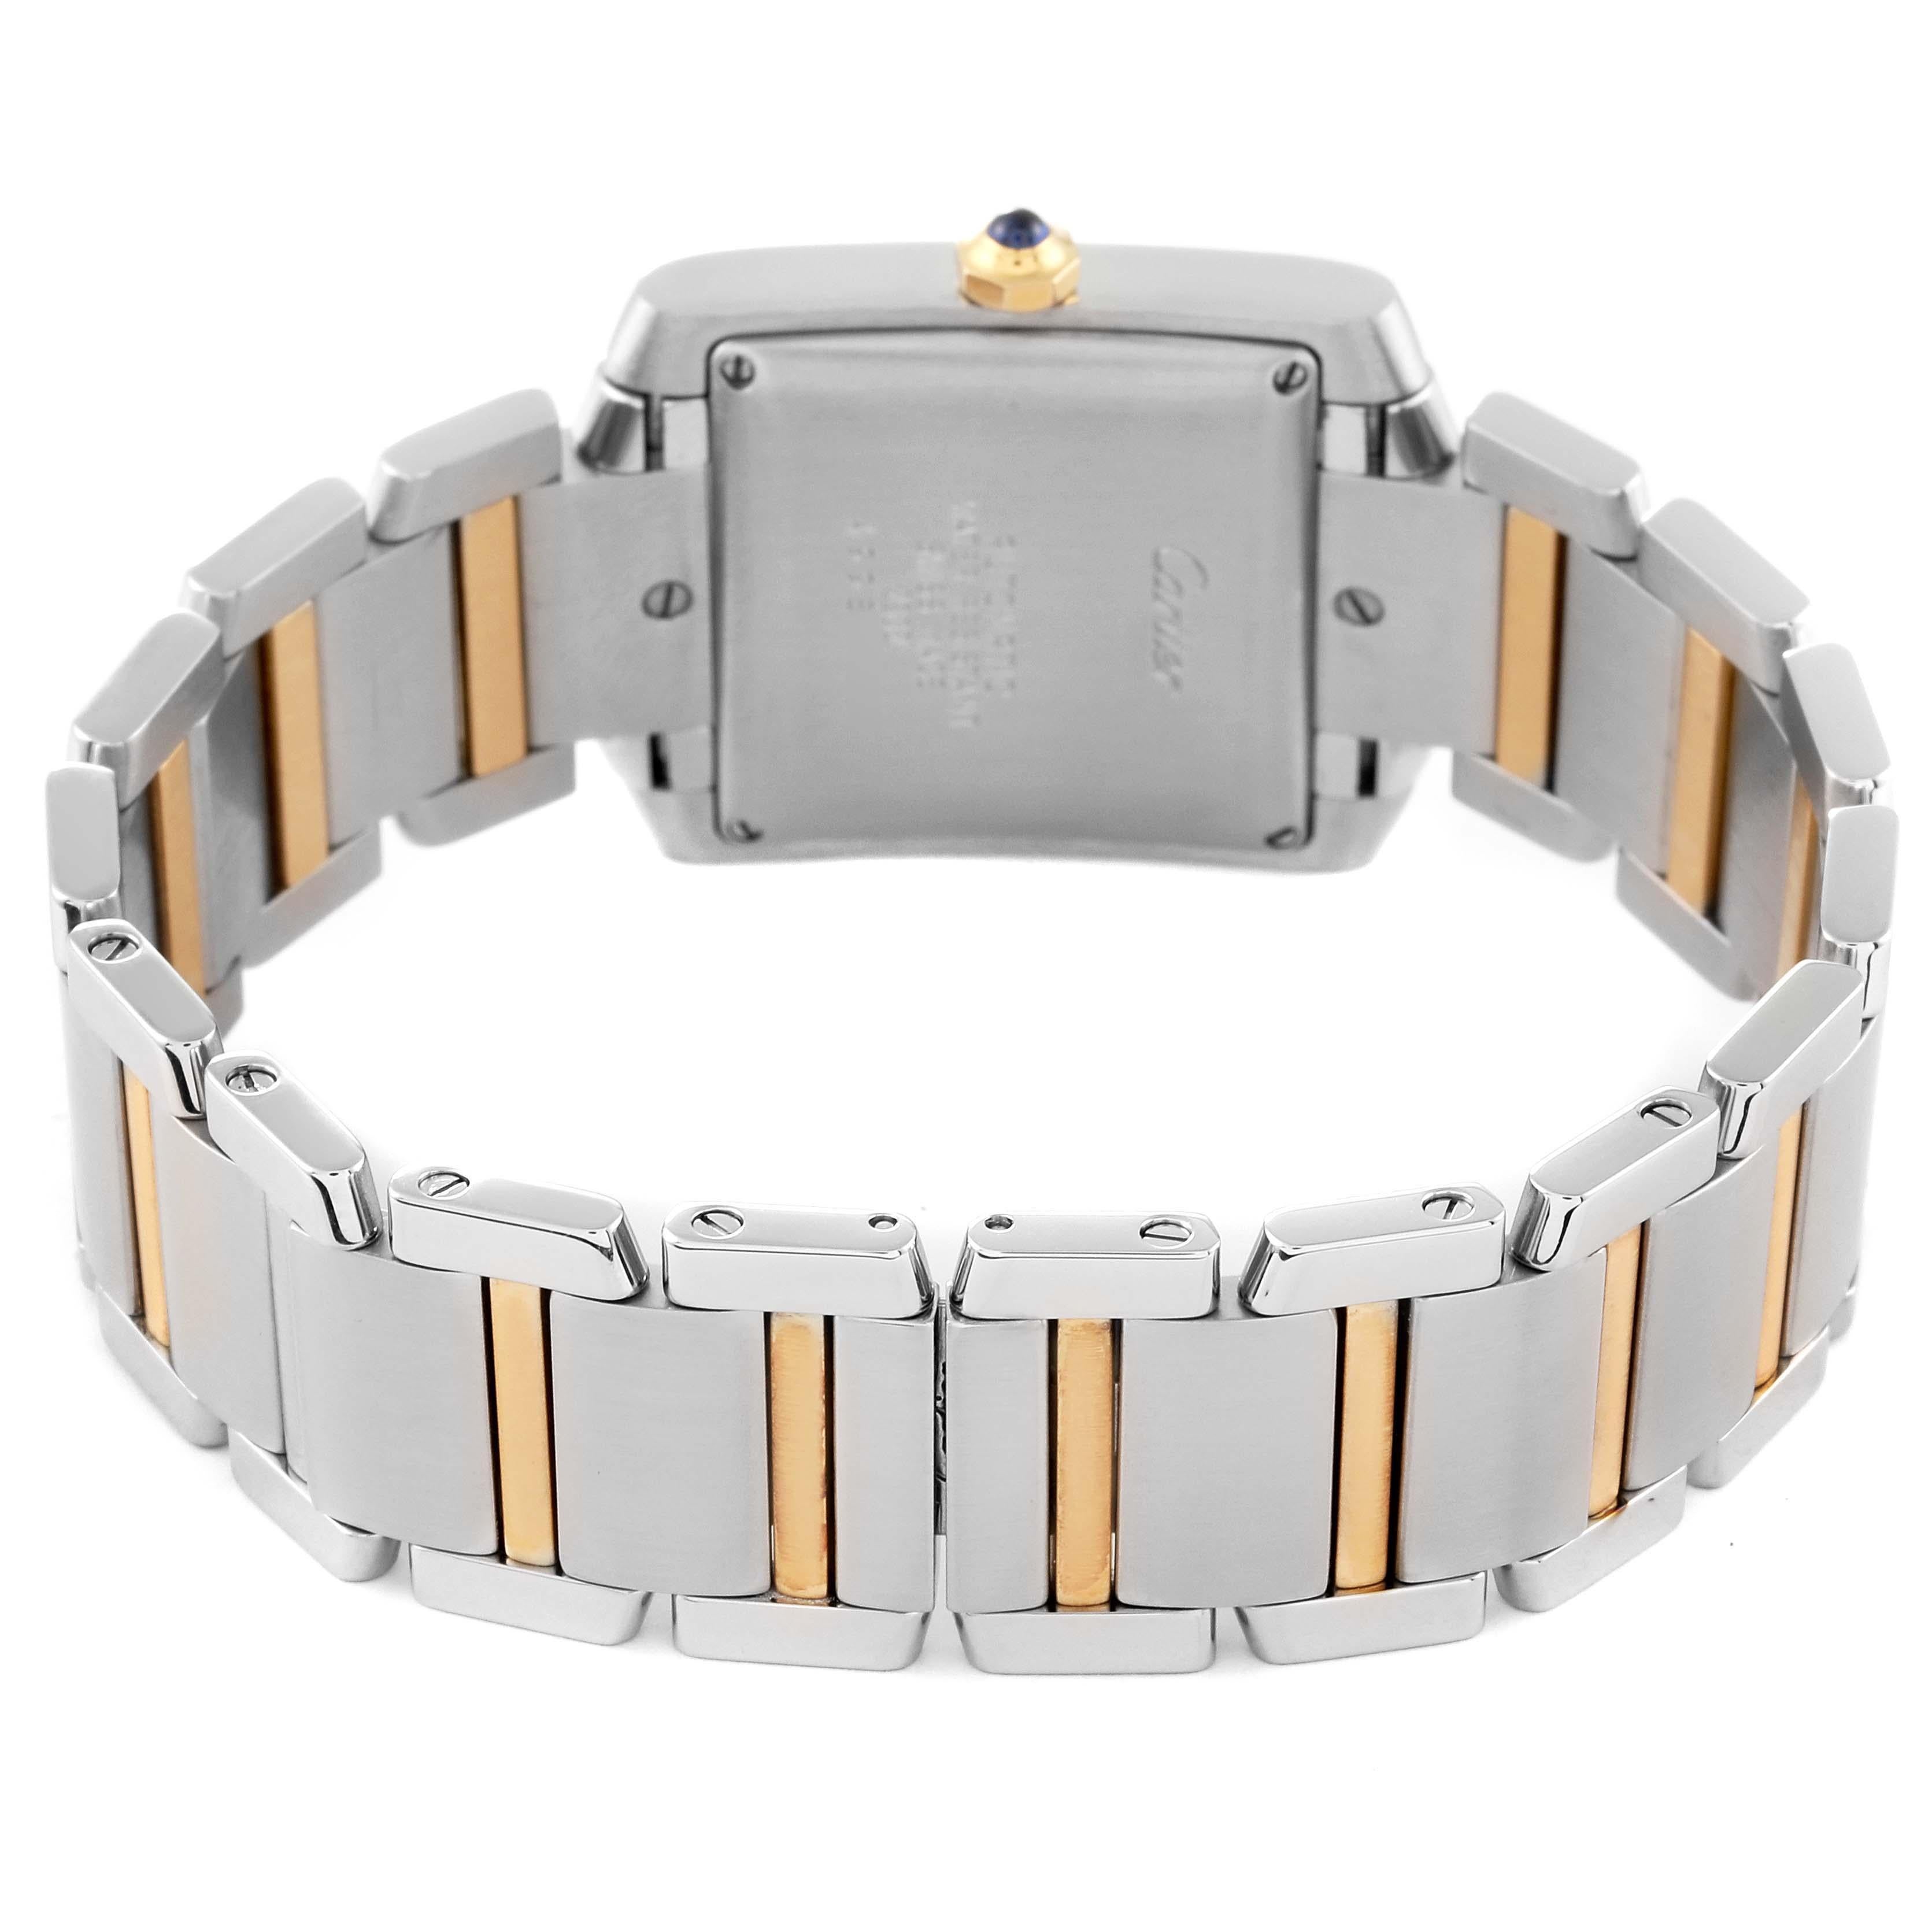 Cartier Tank Francaise Steel Yellow Gold Silver Dial Mens Watch W51005Q4 Papers 3